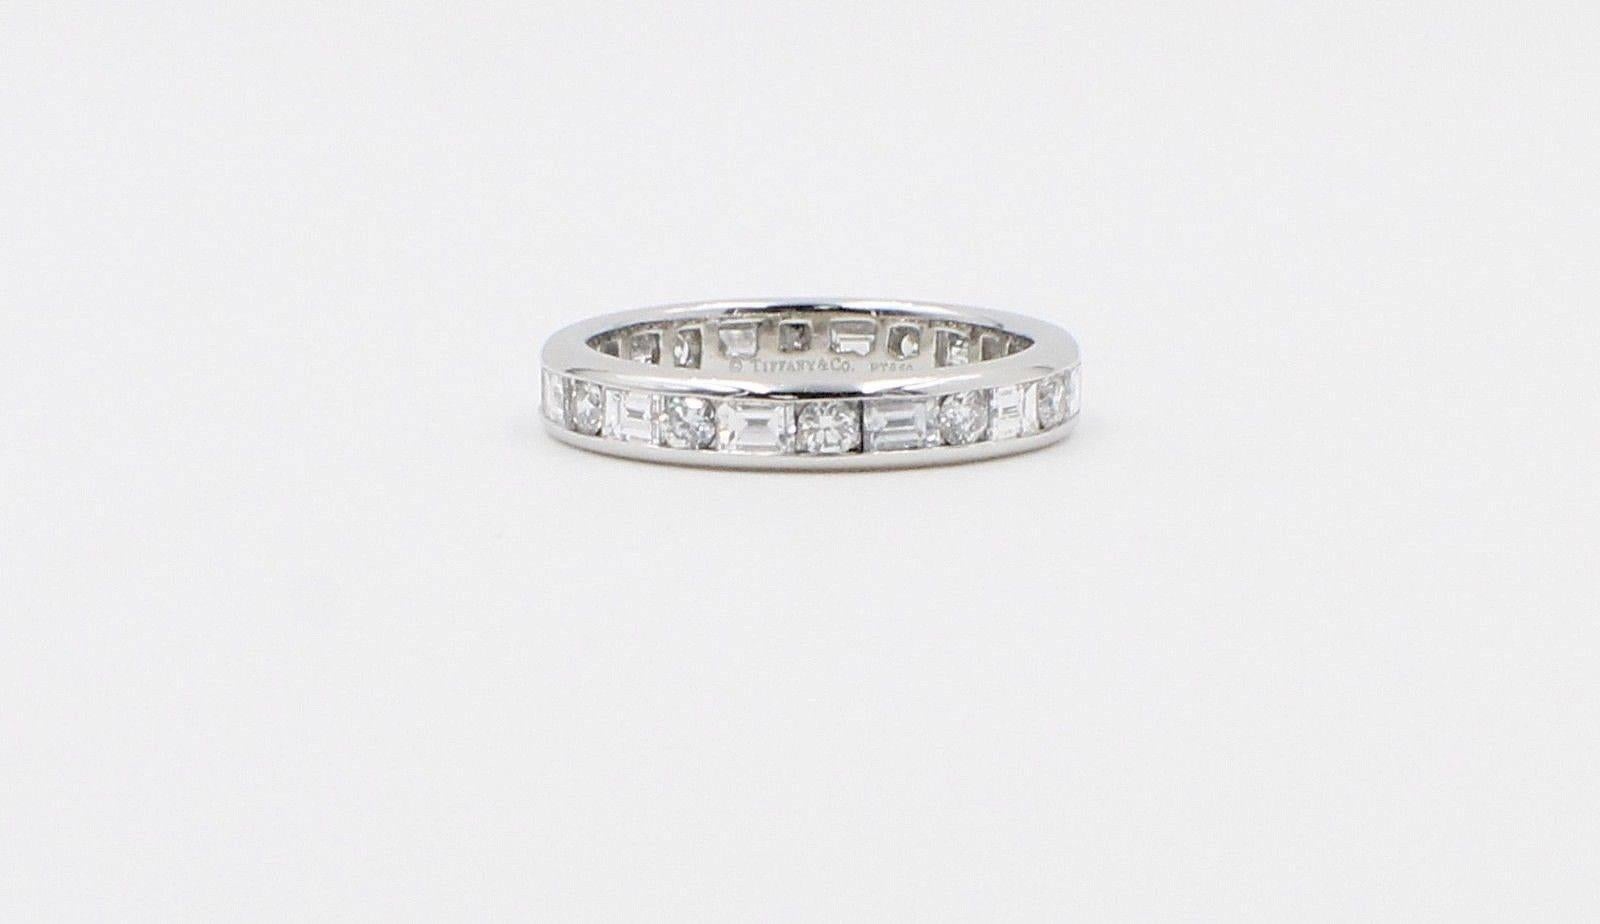 Tiffany & Co.
Style:  Channel Set Round Diamonds & Baguette Diamonds Band Ring
Serial Number:  17669664
Metal:  Platinum PT950
Width:  3 MM
Size:  6
Total Carat Weight:  1.51 TCW
Diamond Shape:  Round Brilliant Diamonds 0.43 TCW & Baguette Diamonds